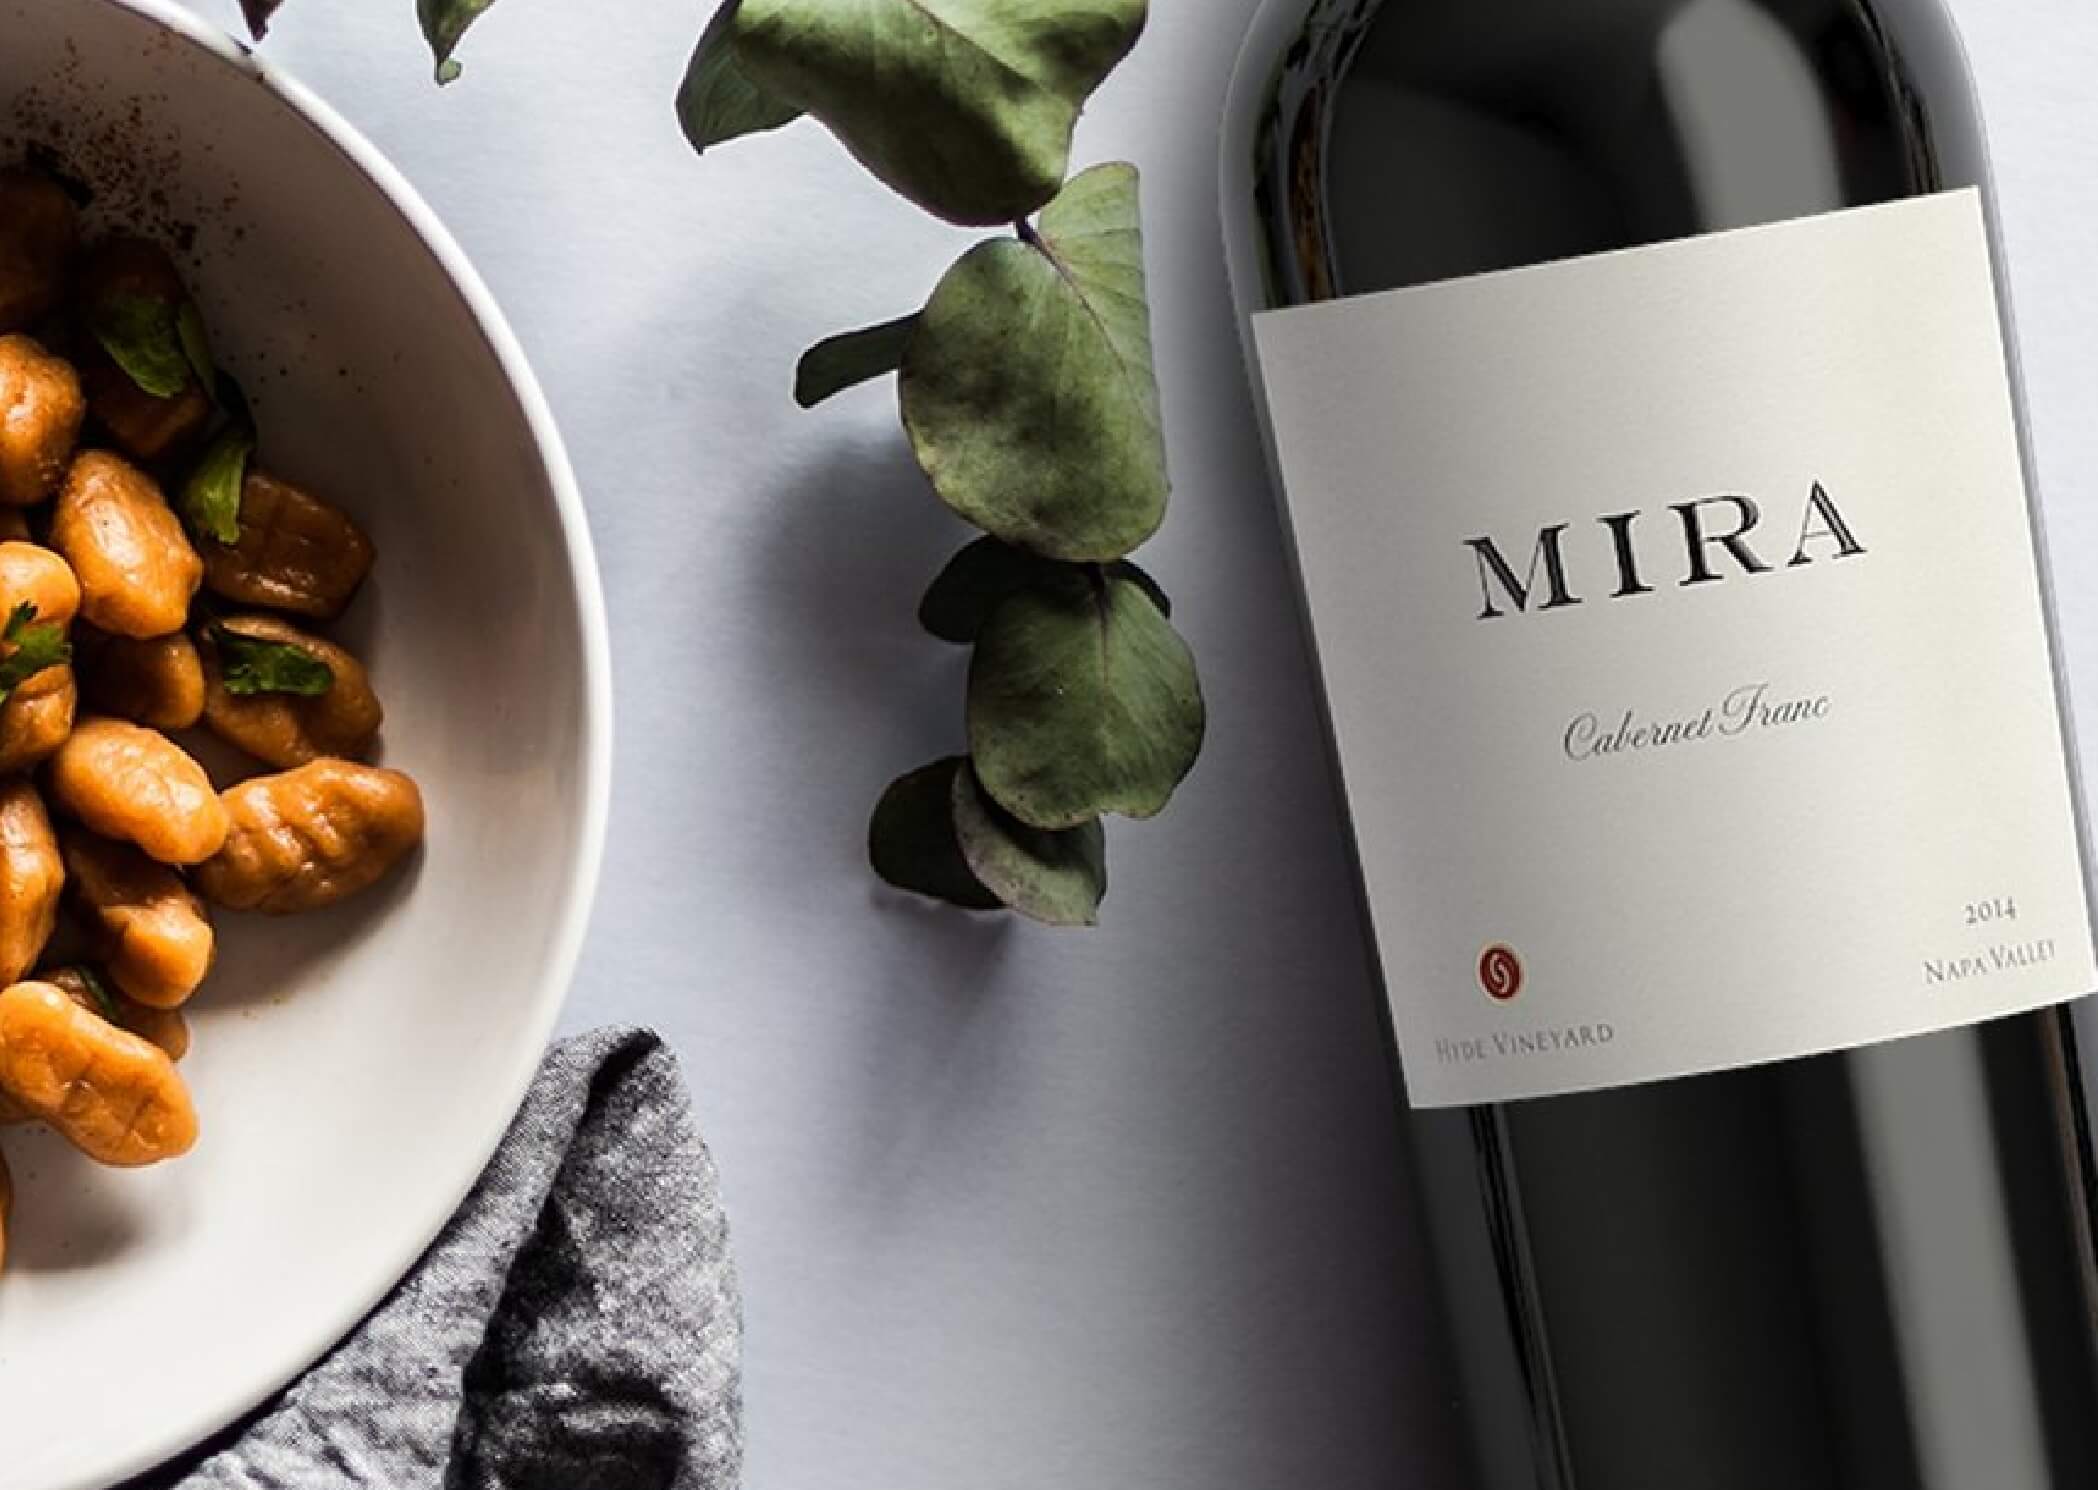 Bottle of Mira 2014 Cabernet Franc deliciously paired